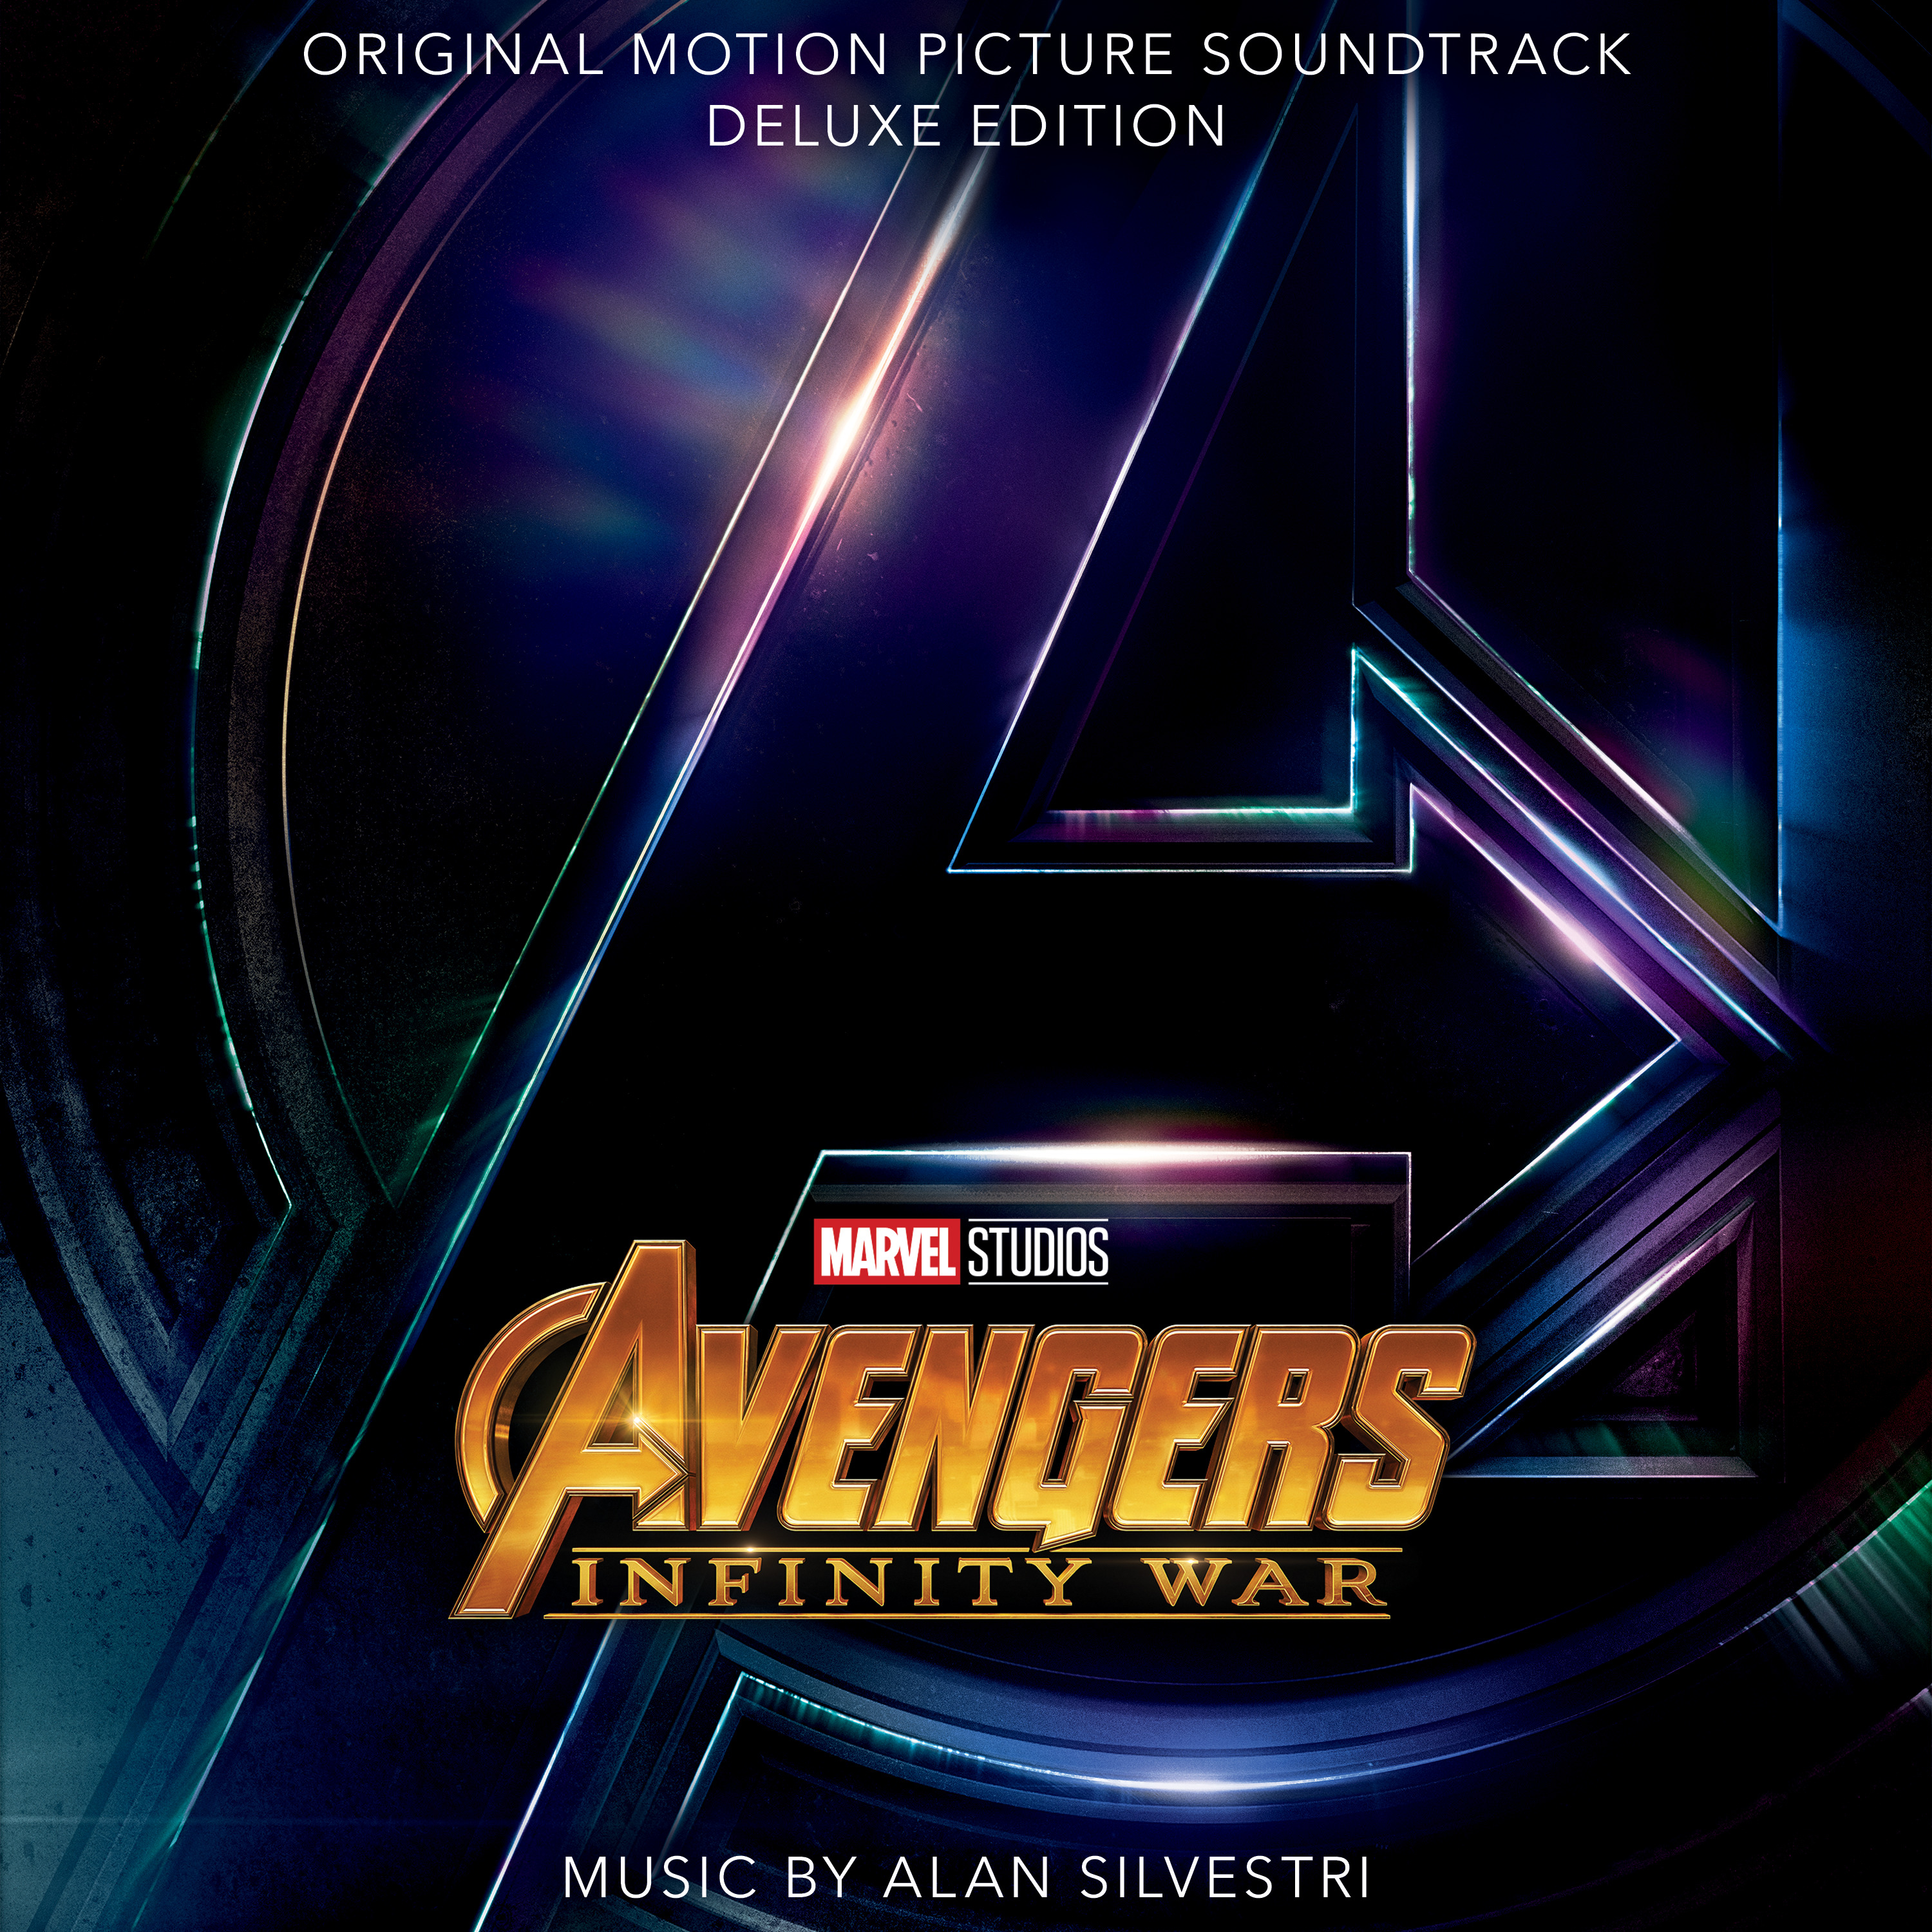 guardians of the galaxy vol 2 soundtrack the avengers